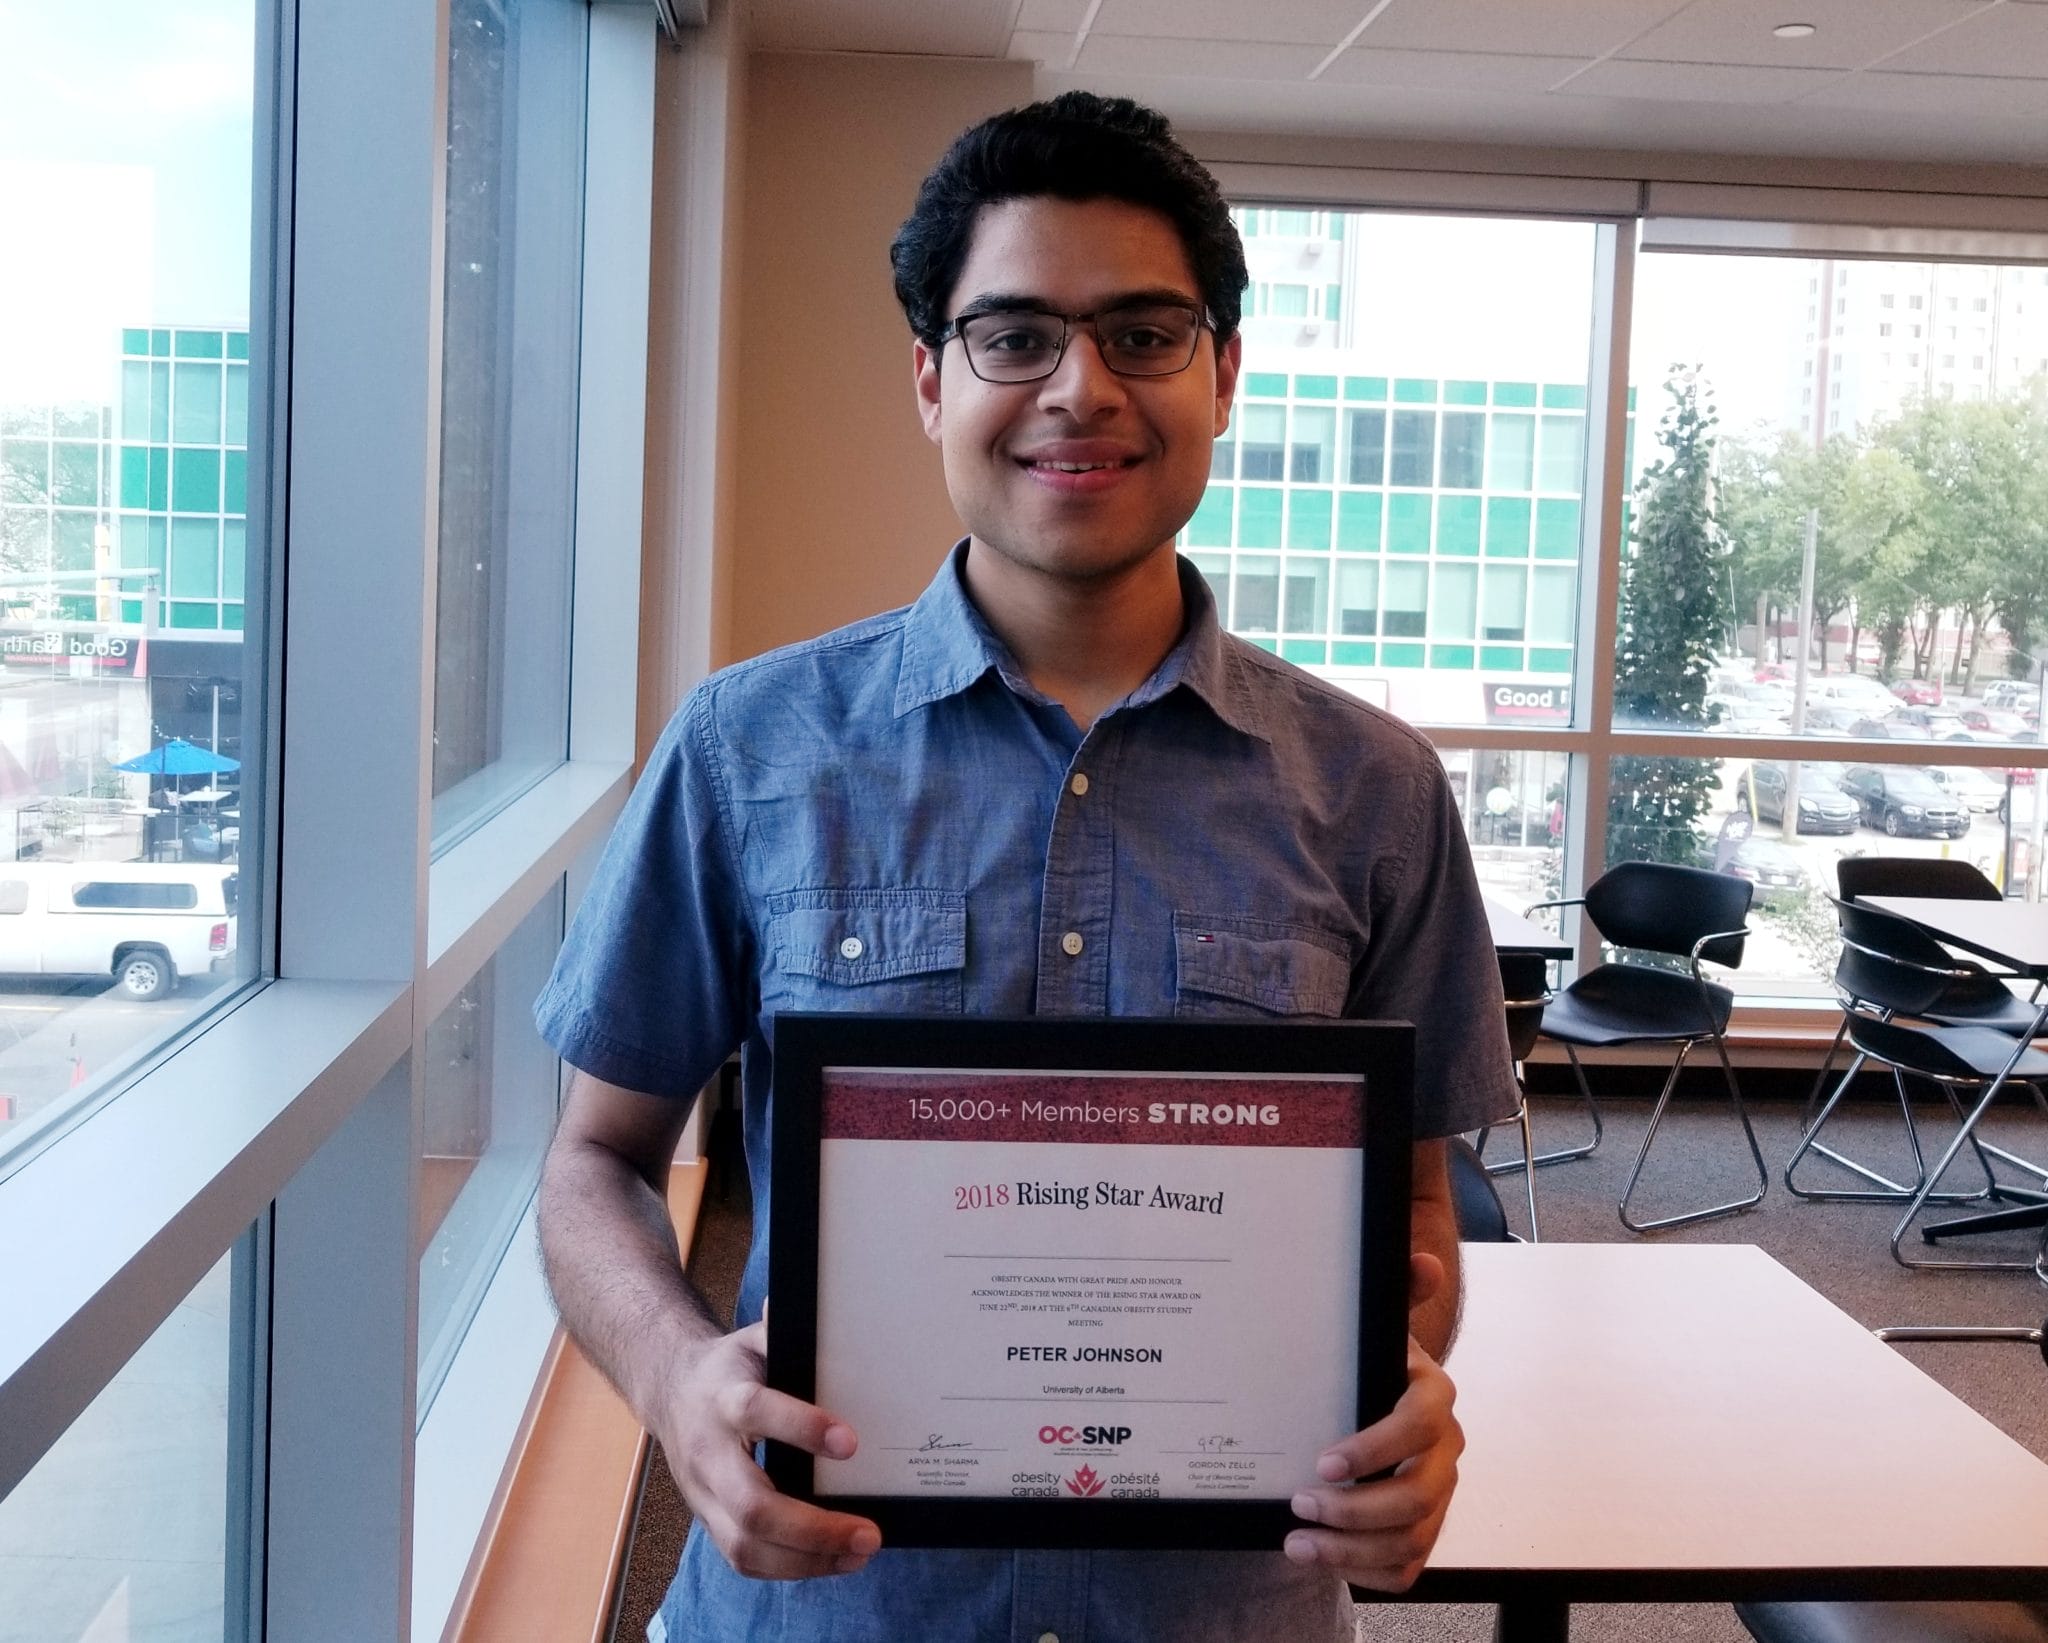 A young man holding a "2018 rising star award" certificate inside an office building, smiling at the camera.